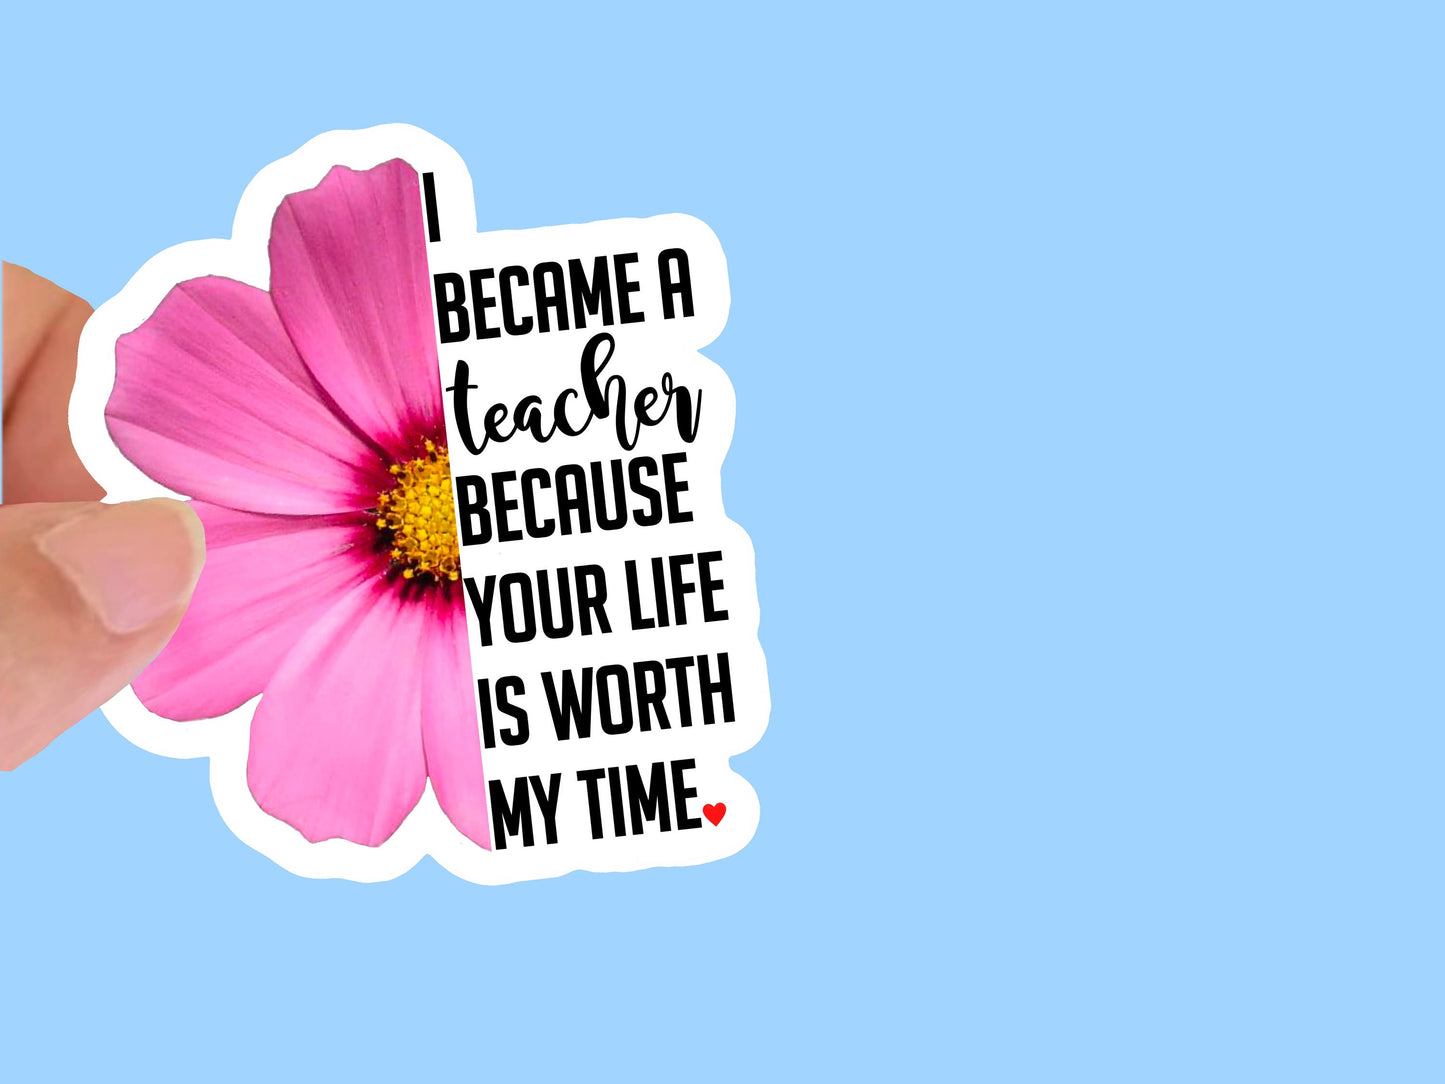 I became a teacher because your life is worth my time Waterproof Sticker, Laptop or Water Bottle Vinyl decal, Gift for teacher